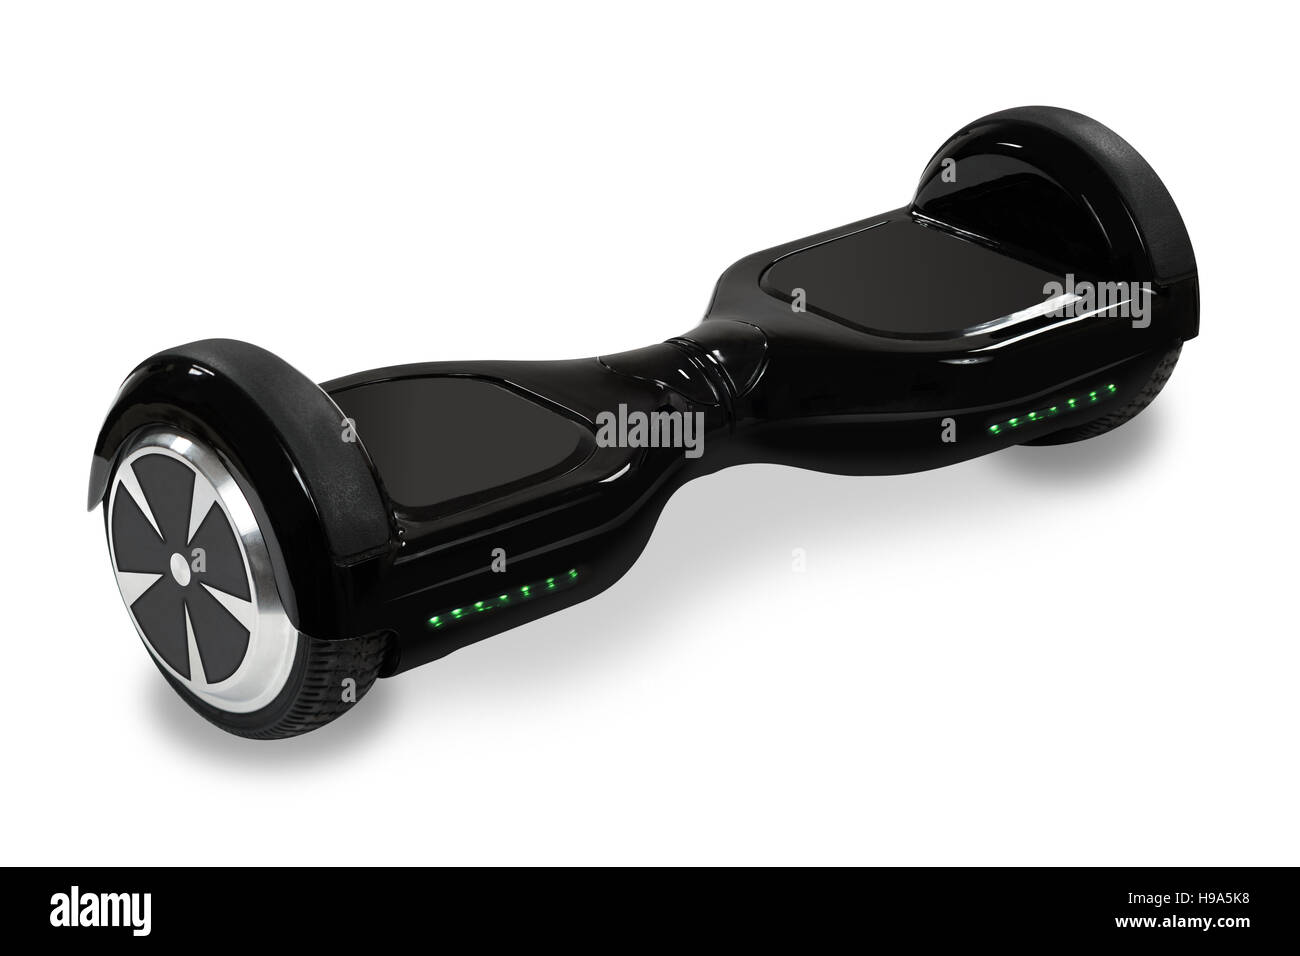 Electric scooter board hoverboard Stock Photo